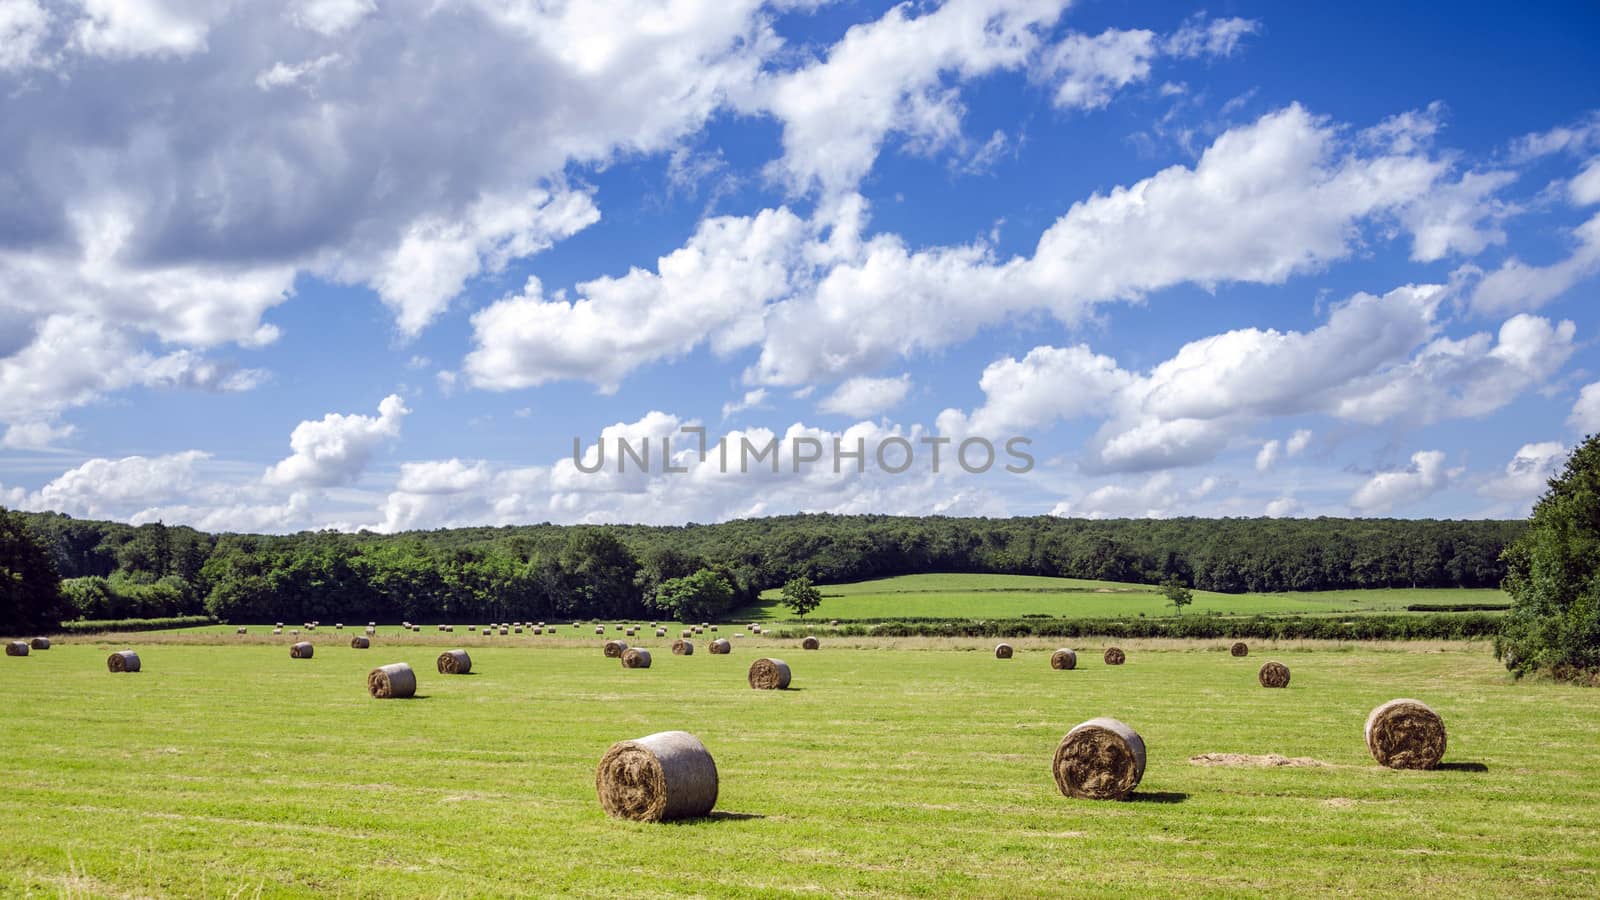 Landscape view over field with lots of hay bales.